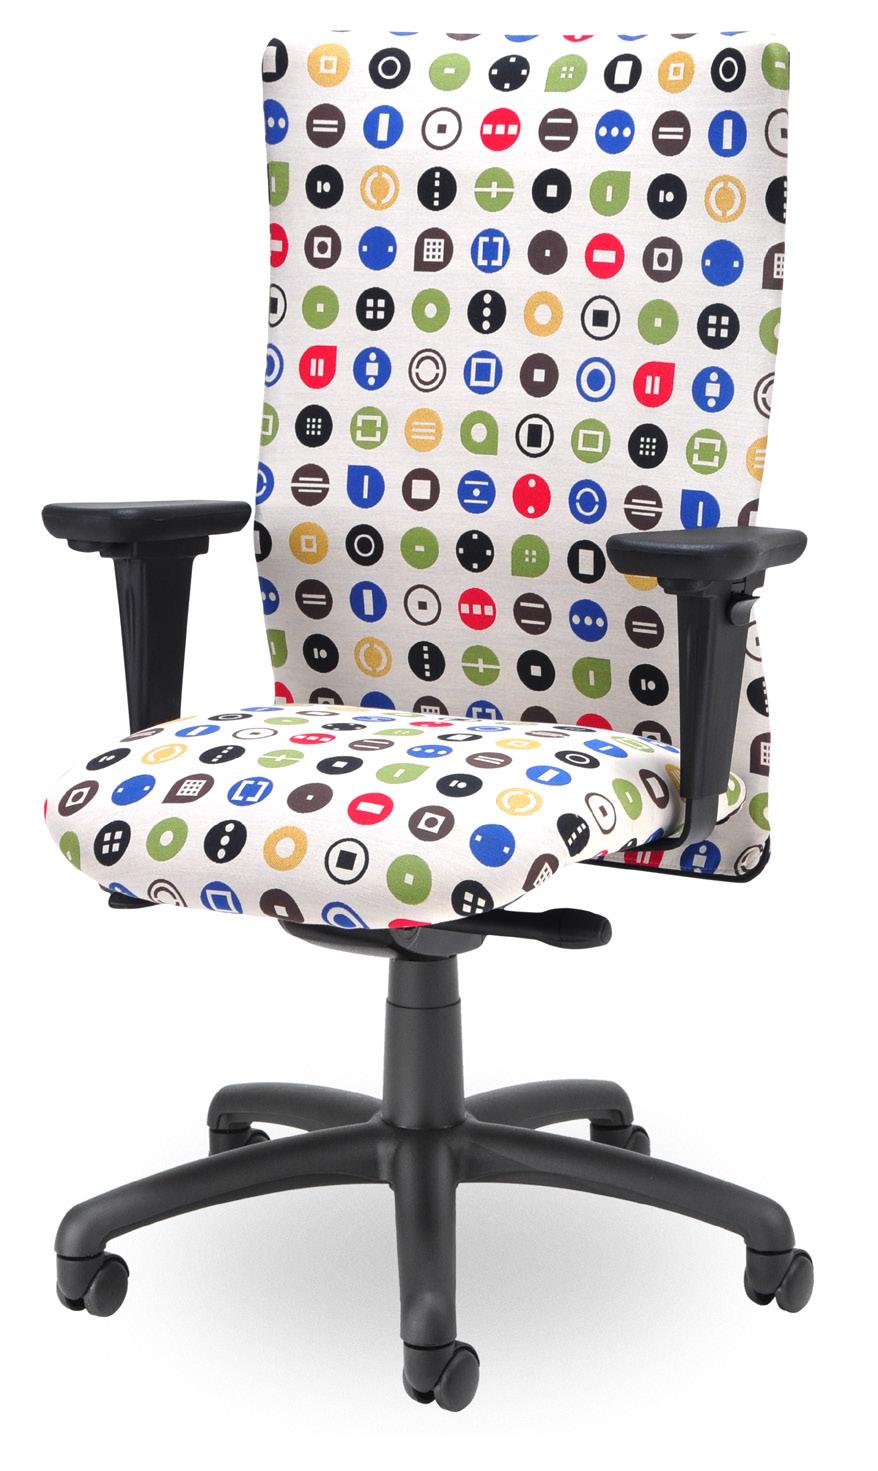 ergonomic work chairs Natural lumbar support is designed into this thin sleek back.